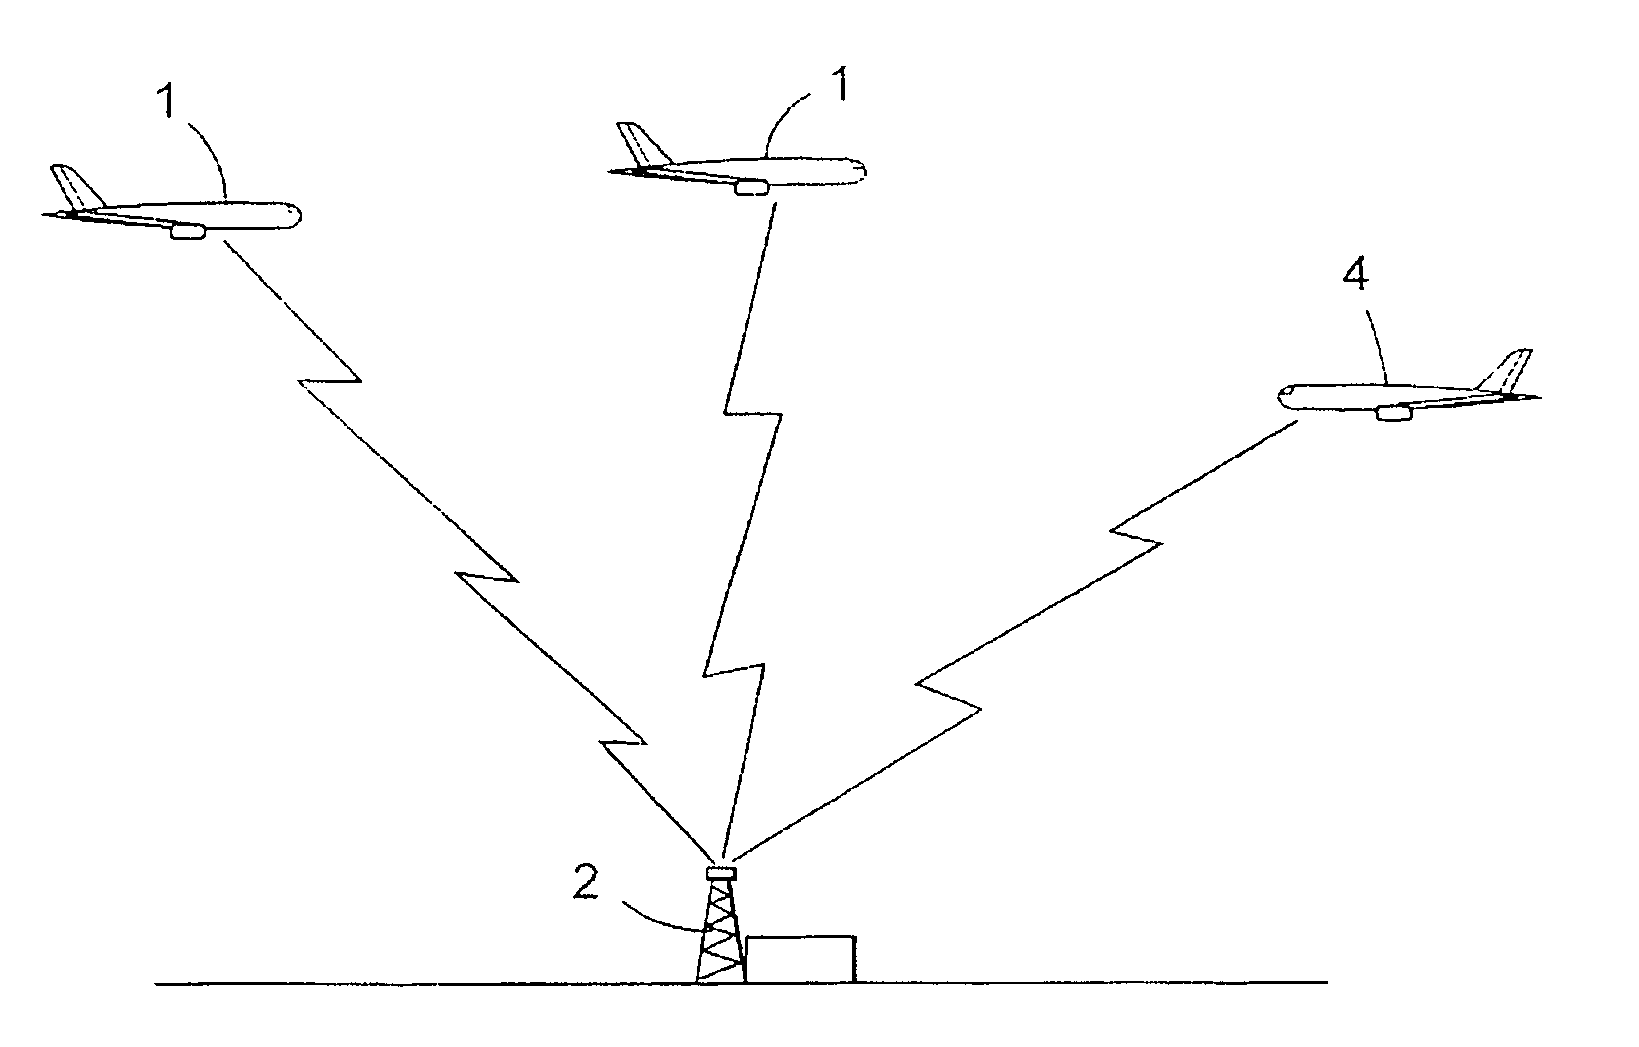 Flight control method using wind data from airplane trajectory